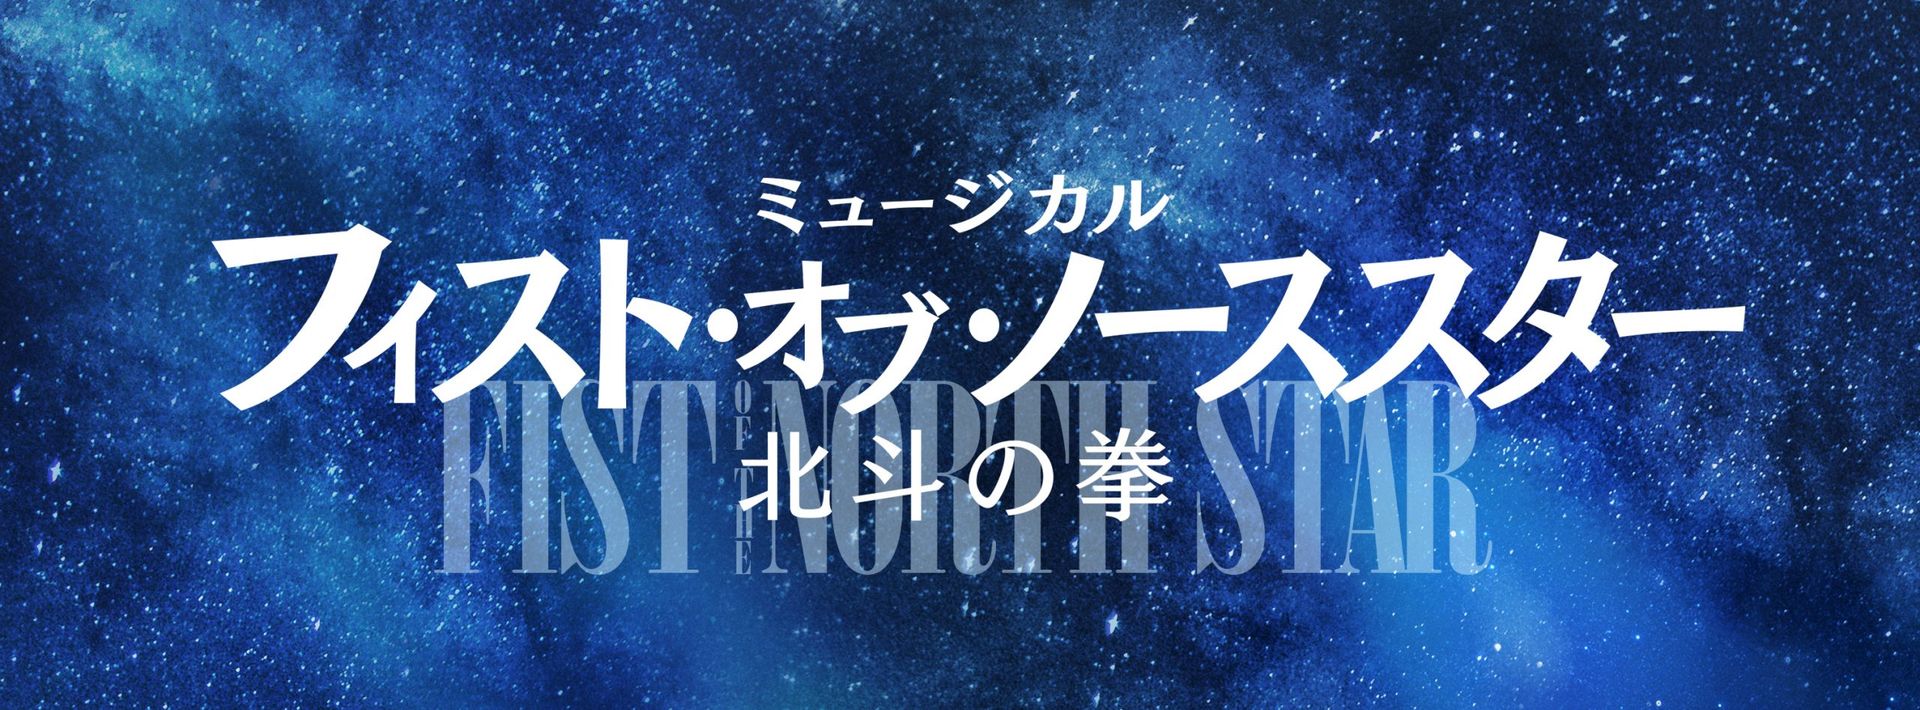 [Streaming+] Musical “Fist of the North Star”